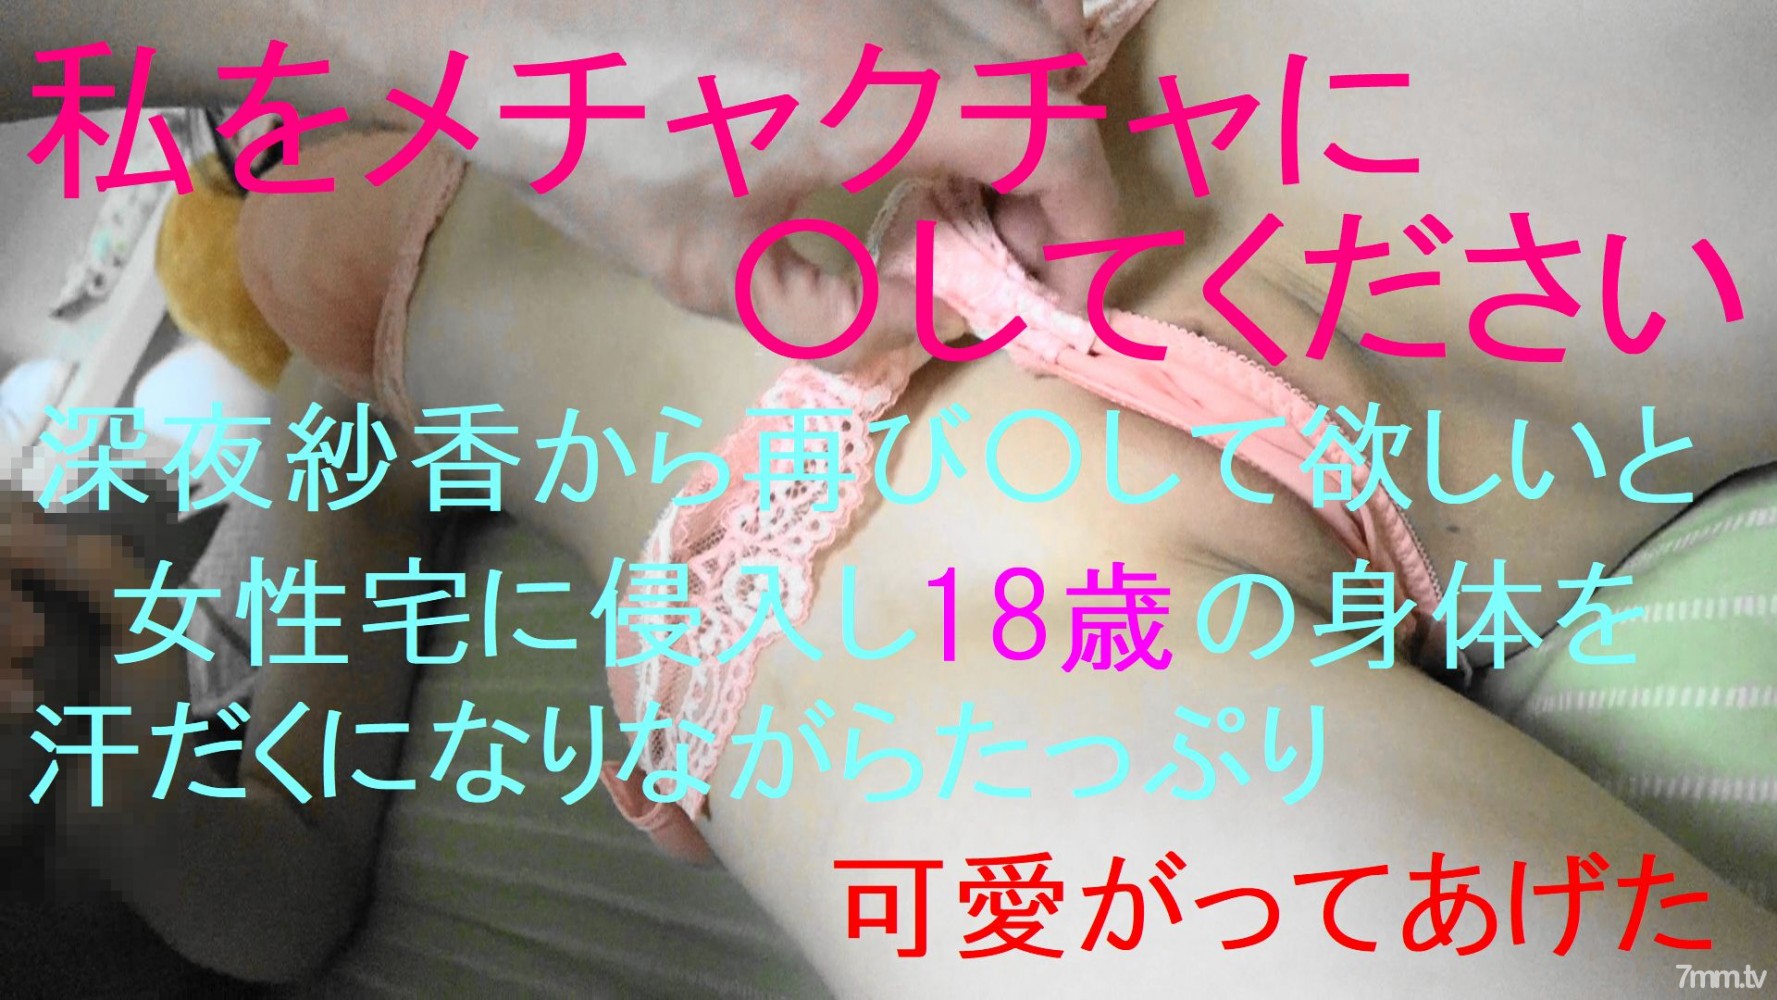 FC2 PPV 844280 18-year-old men ○ la Nasty up Kyoto girl second. Even though I know I shouldn’t, my